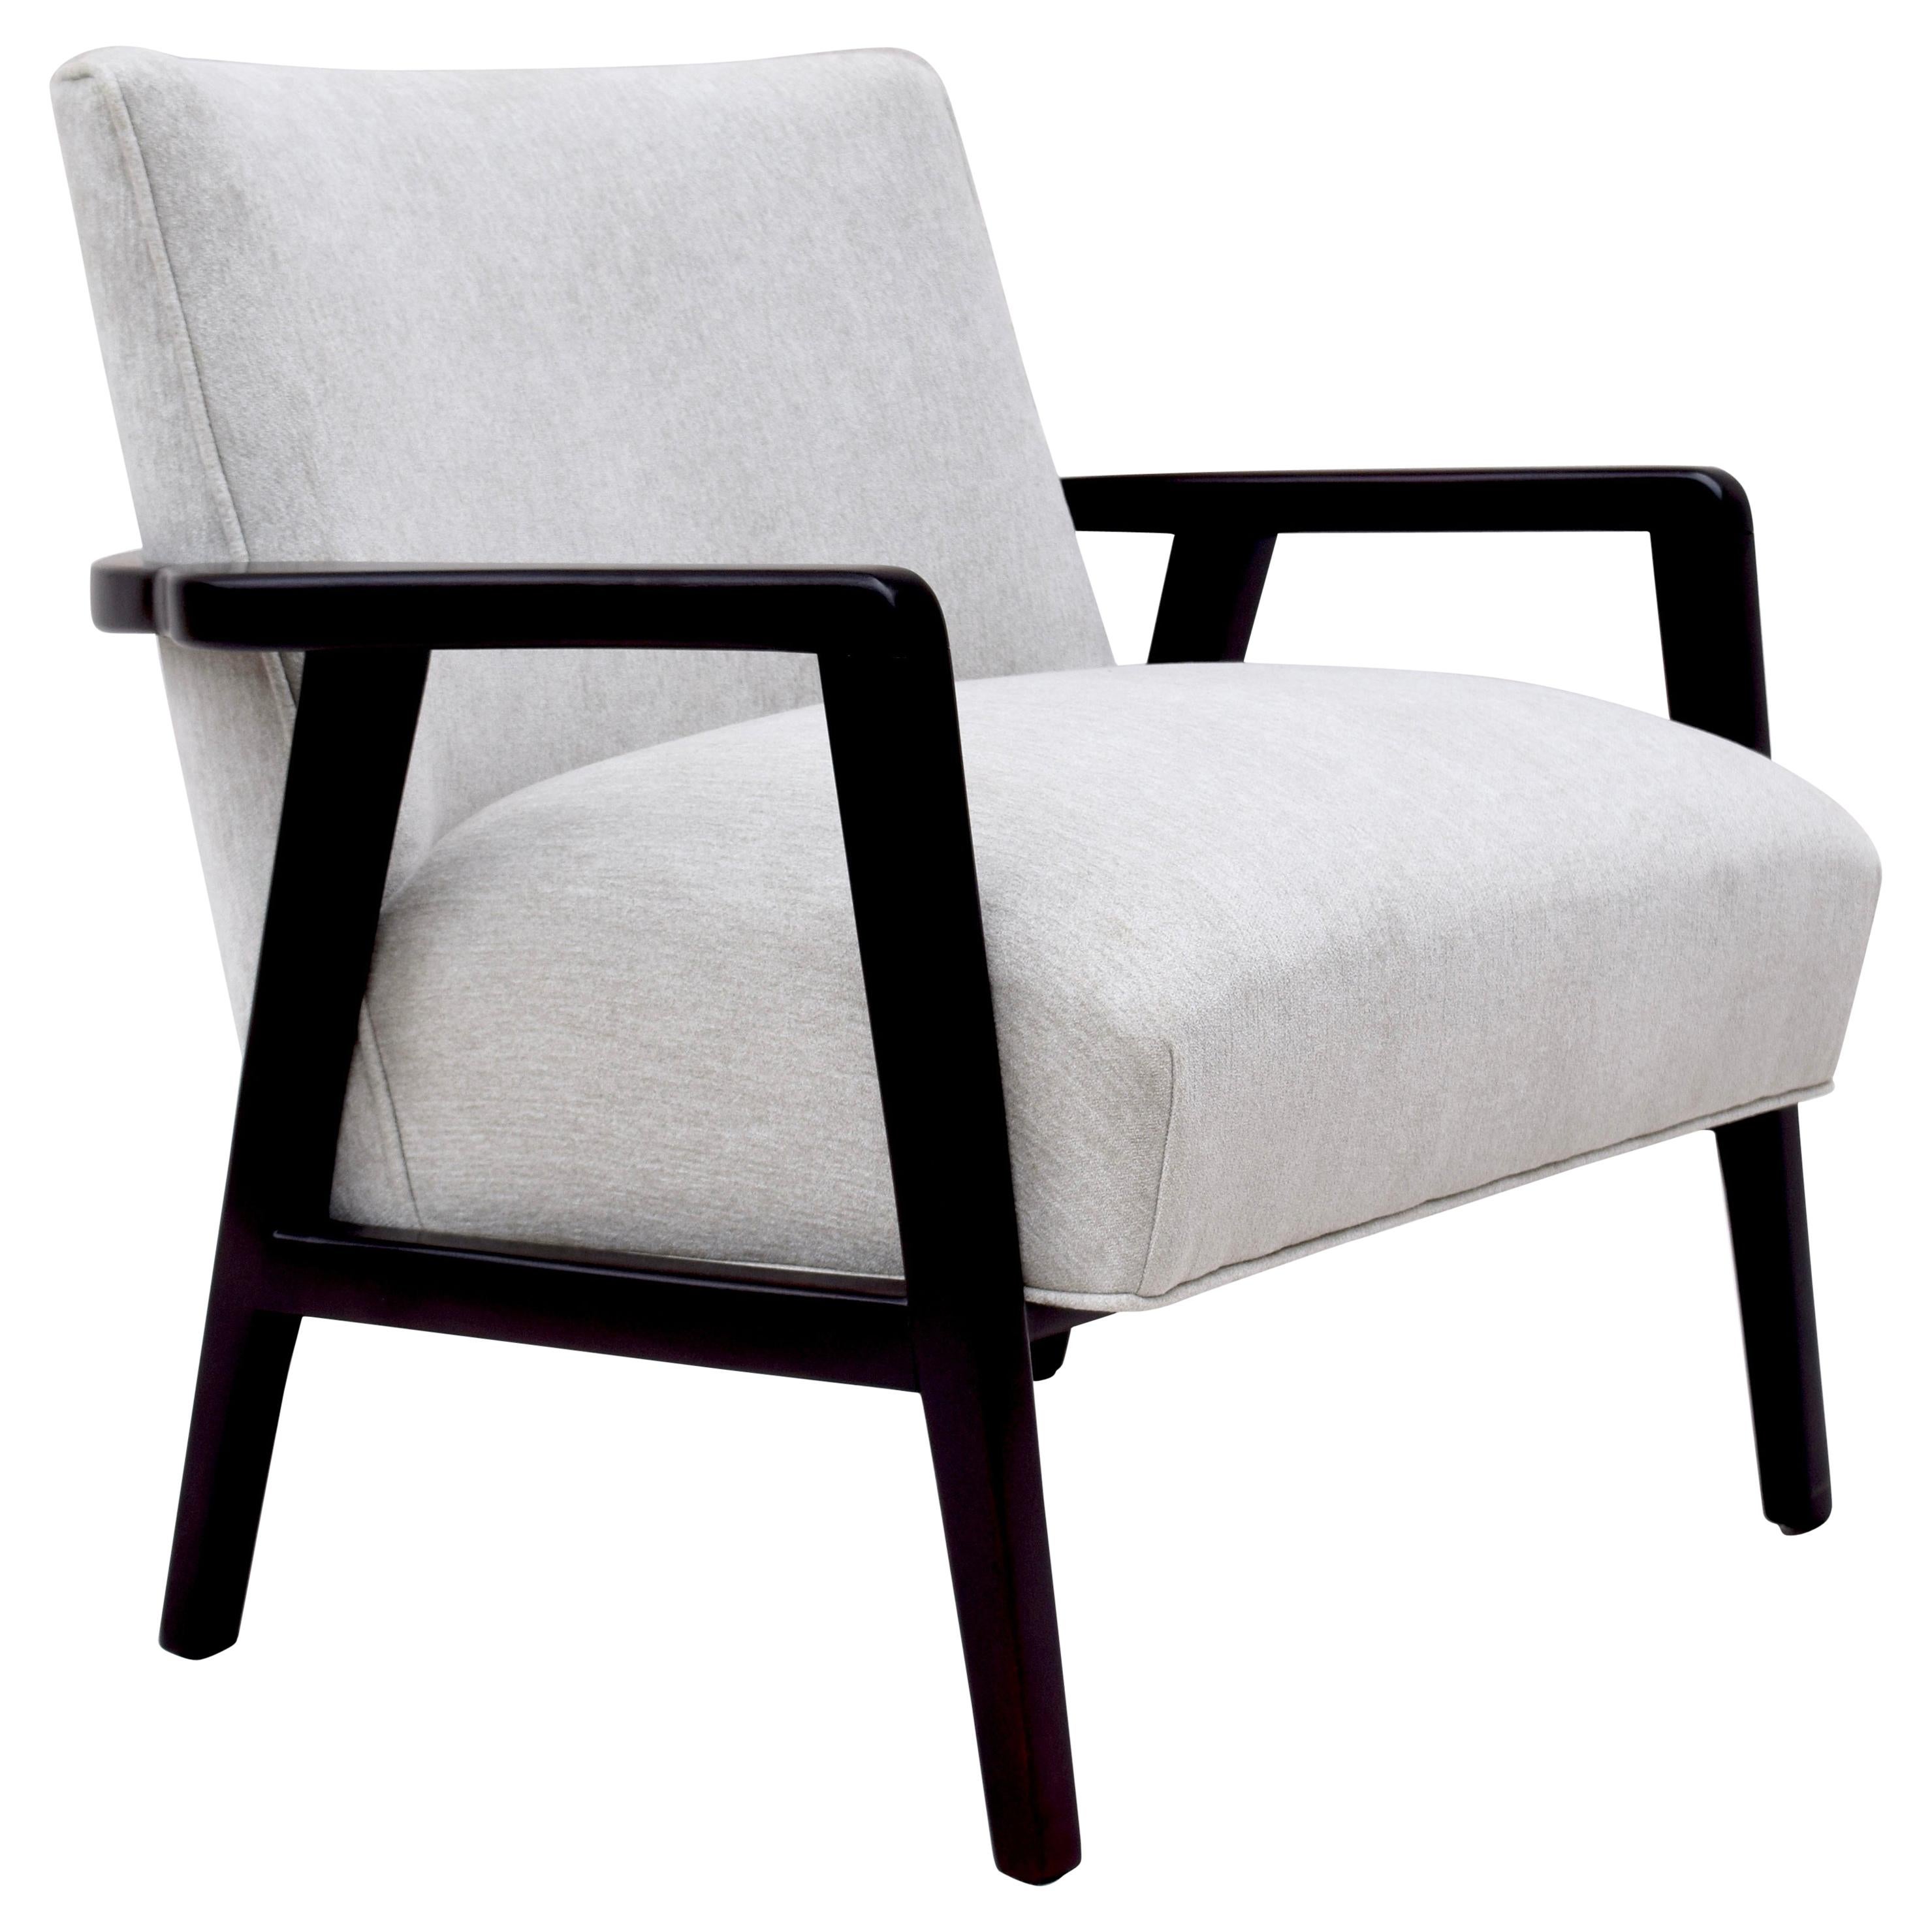 Mid-Century Modern Lounge Chair in the Style of Edward Wormley for Dunbar